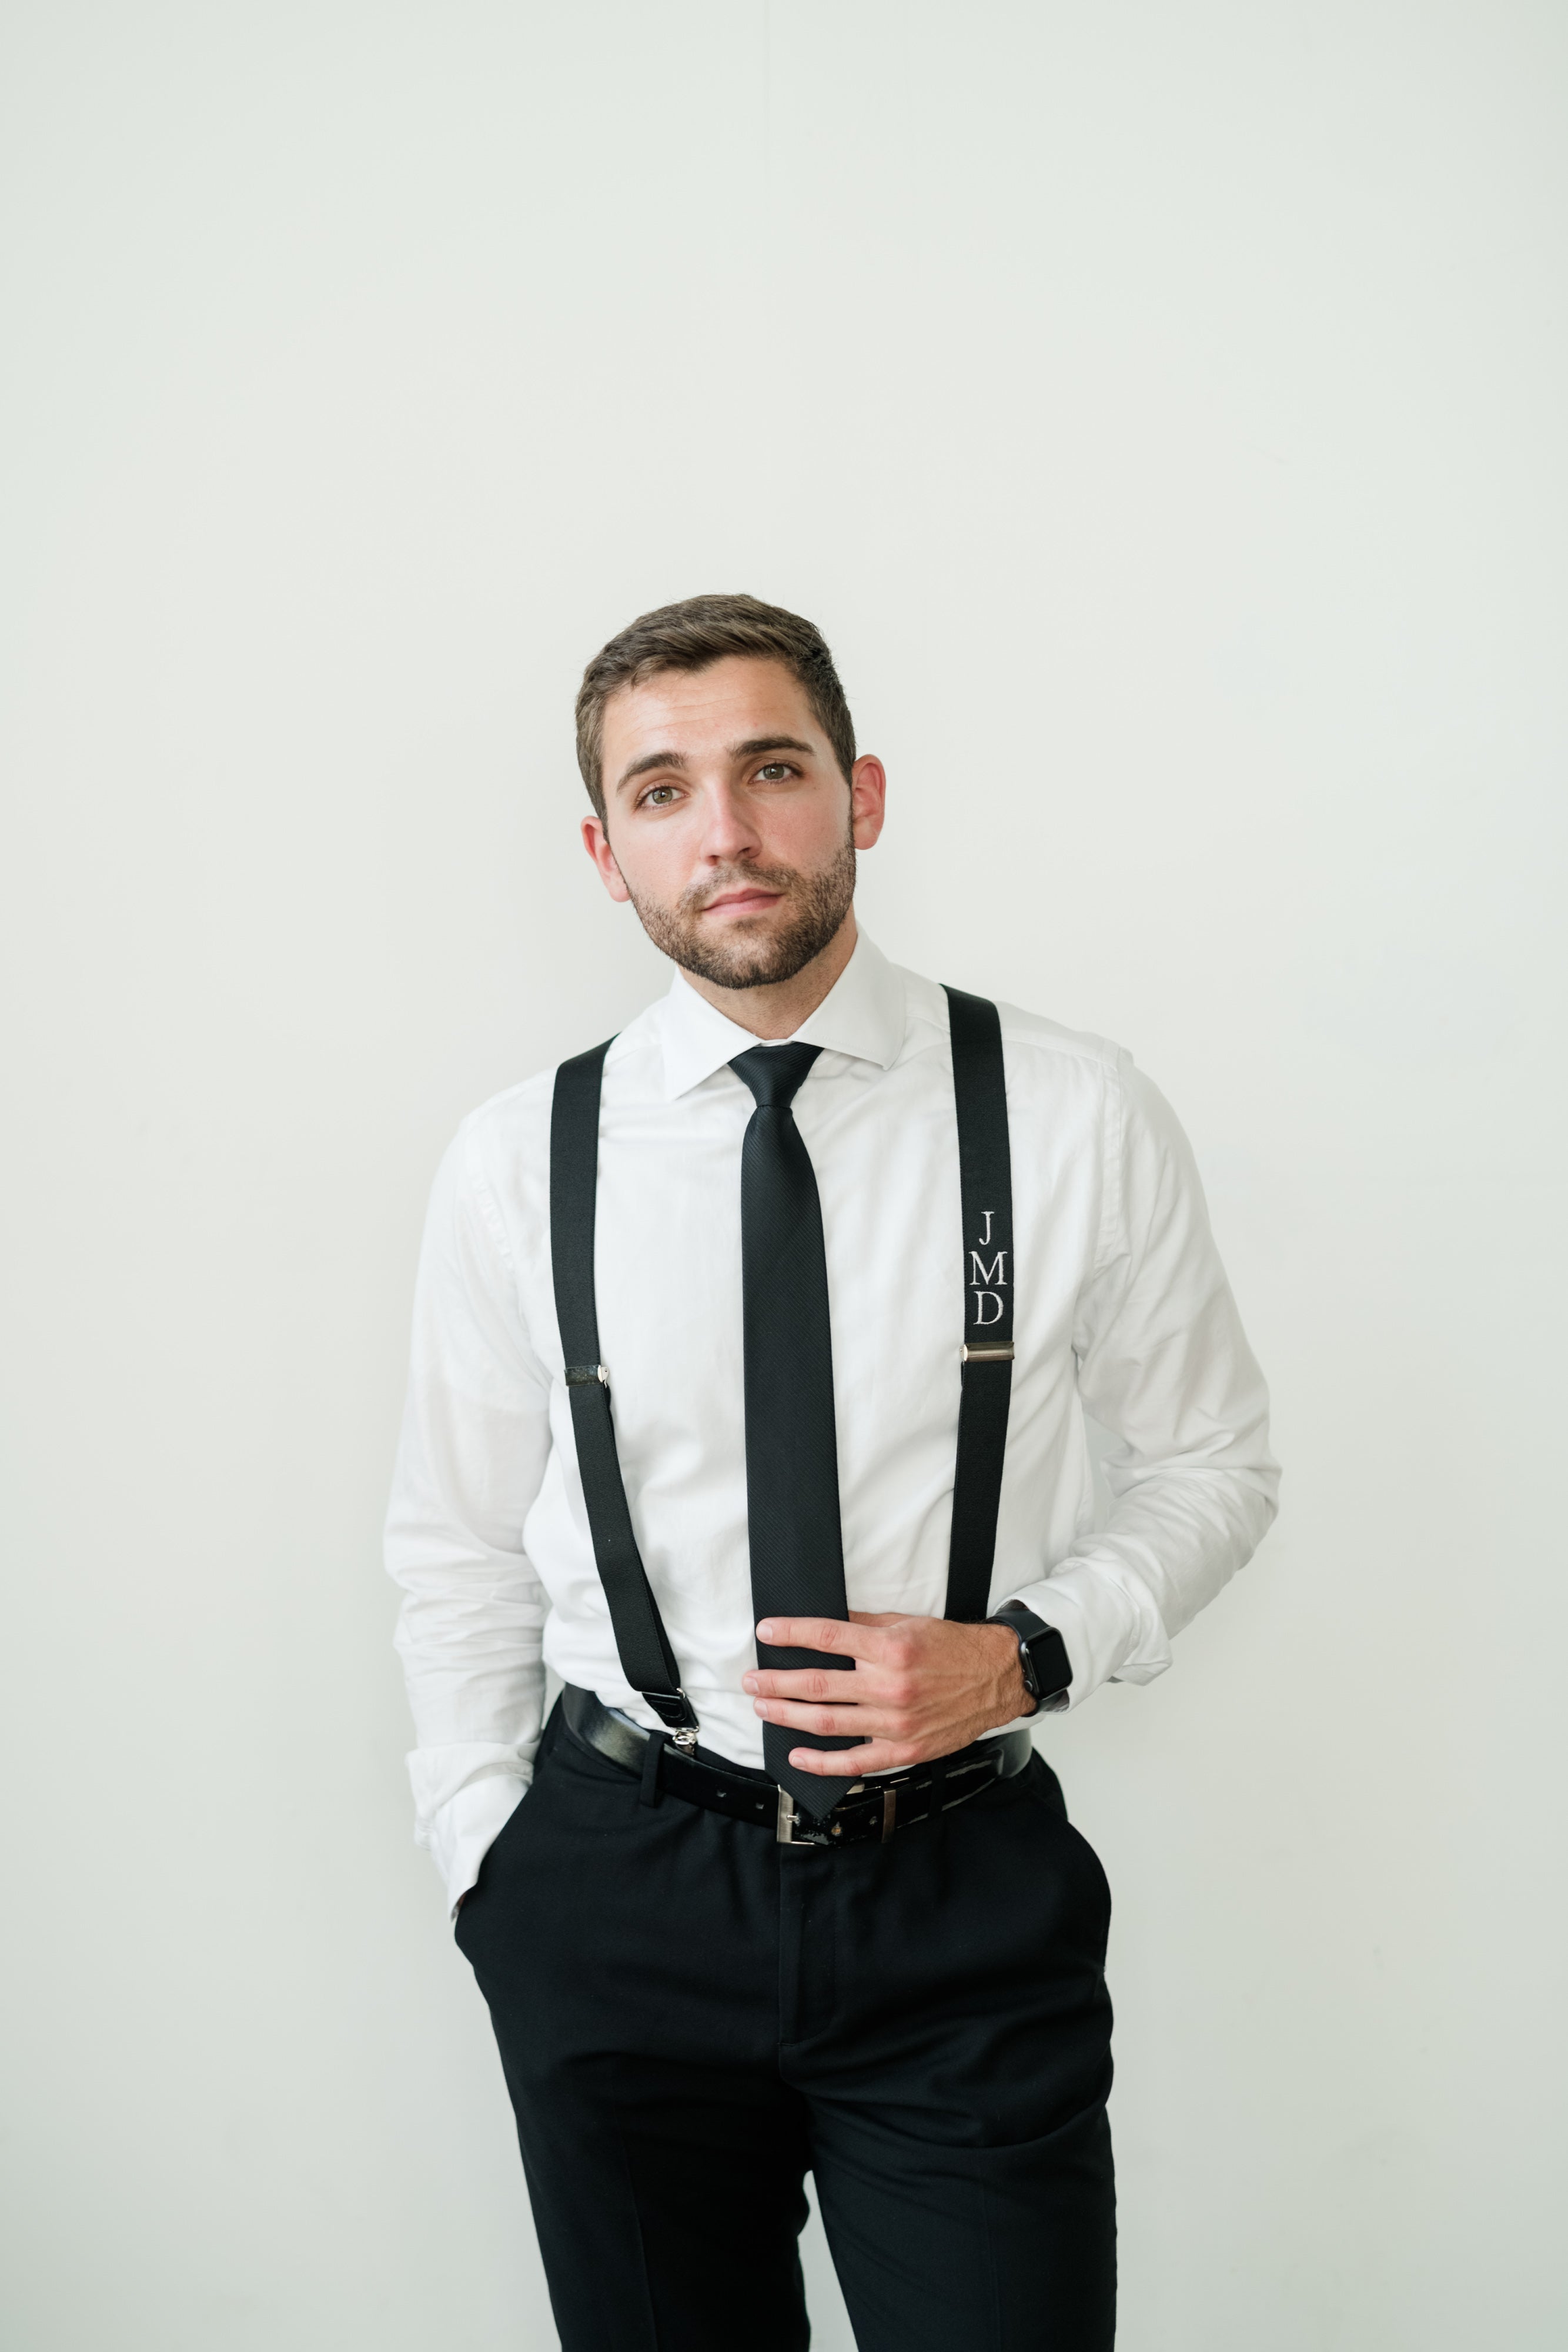 Embroidered Suspenders: A Special Engagement Gift